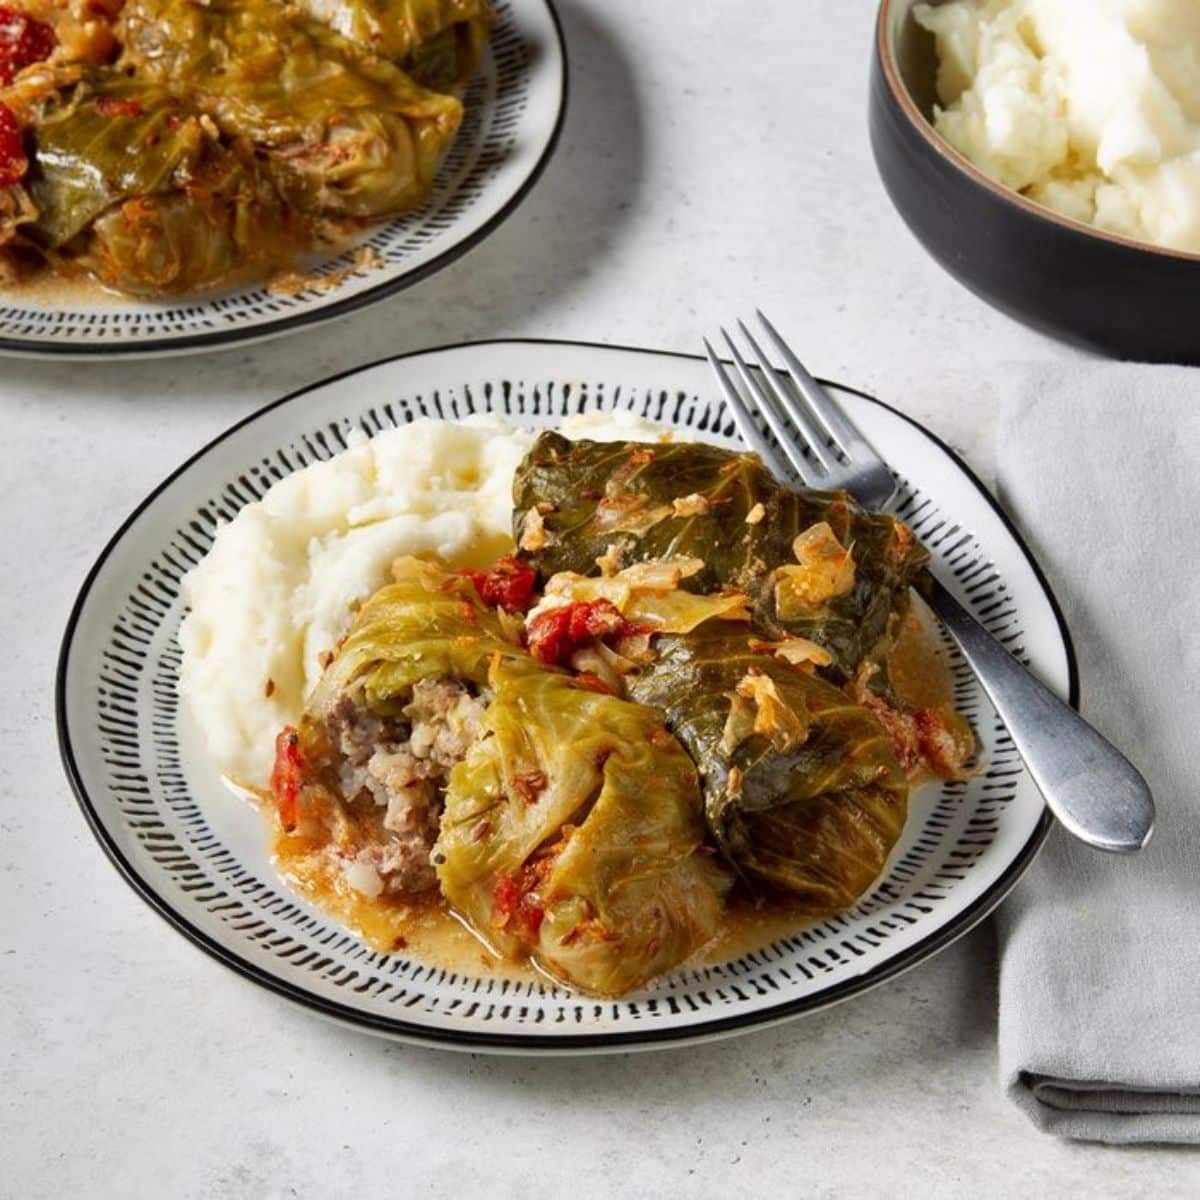 Hungarian stuffed cabbage on a plate with a fork.